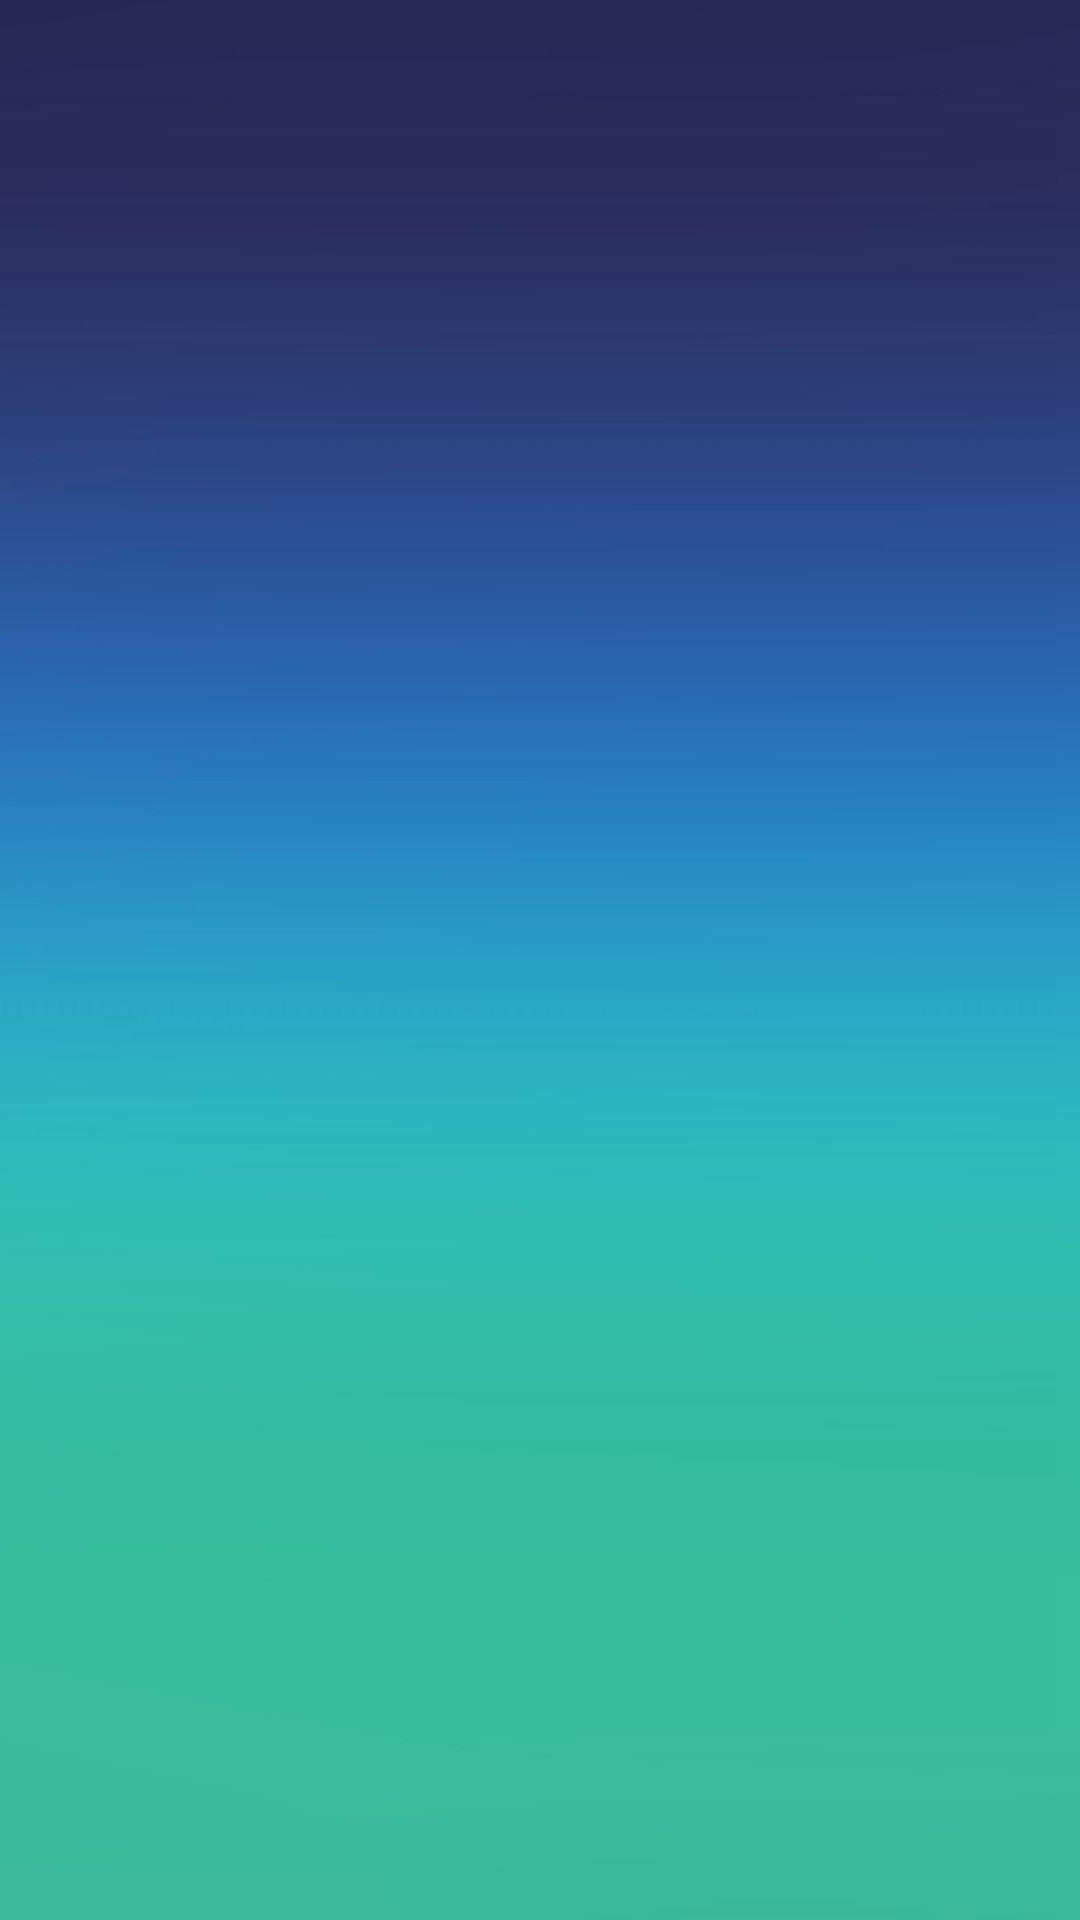 Color Fade iPhone 6 Wallpaper Free Color Fade iPhone